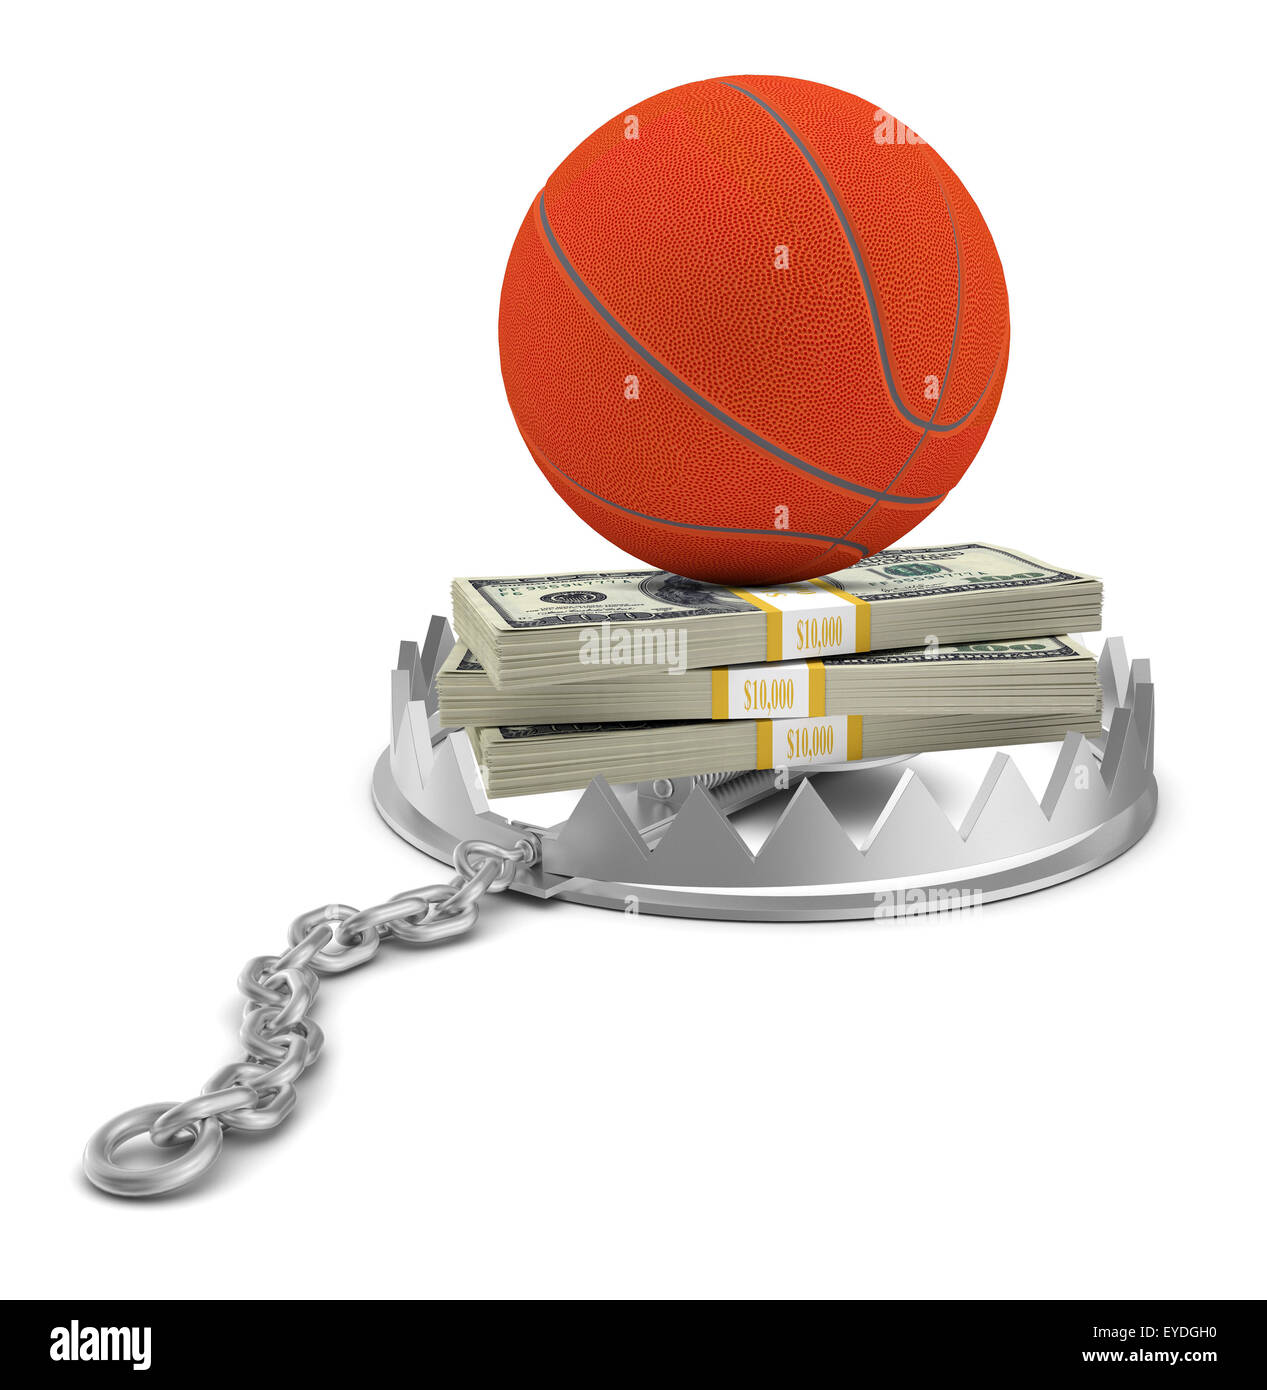 Basketball with money in bear trap Stock Photo